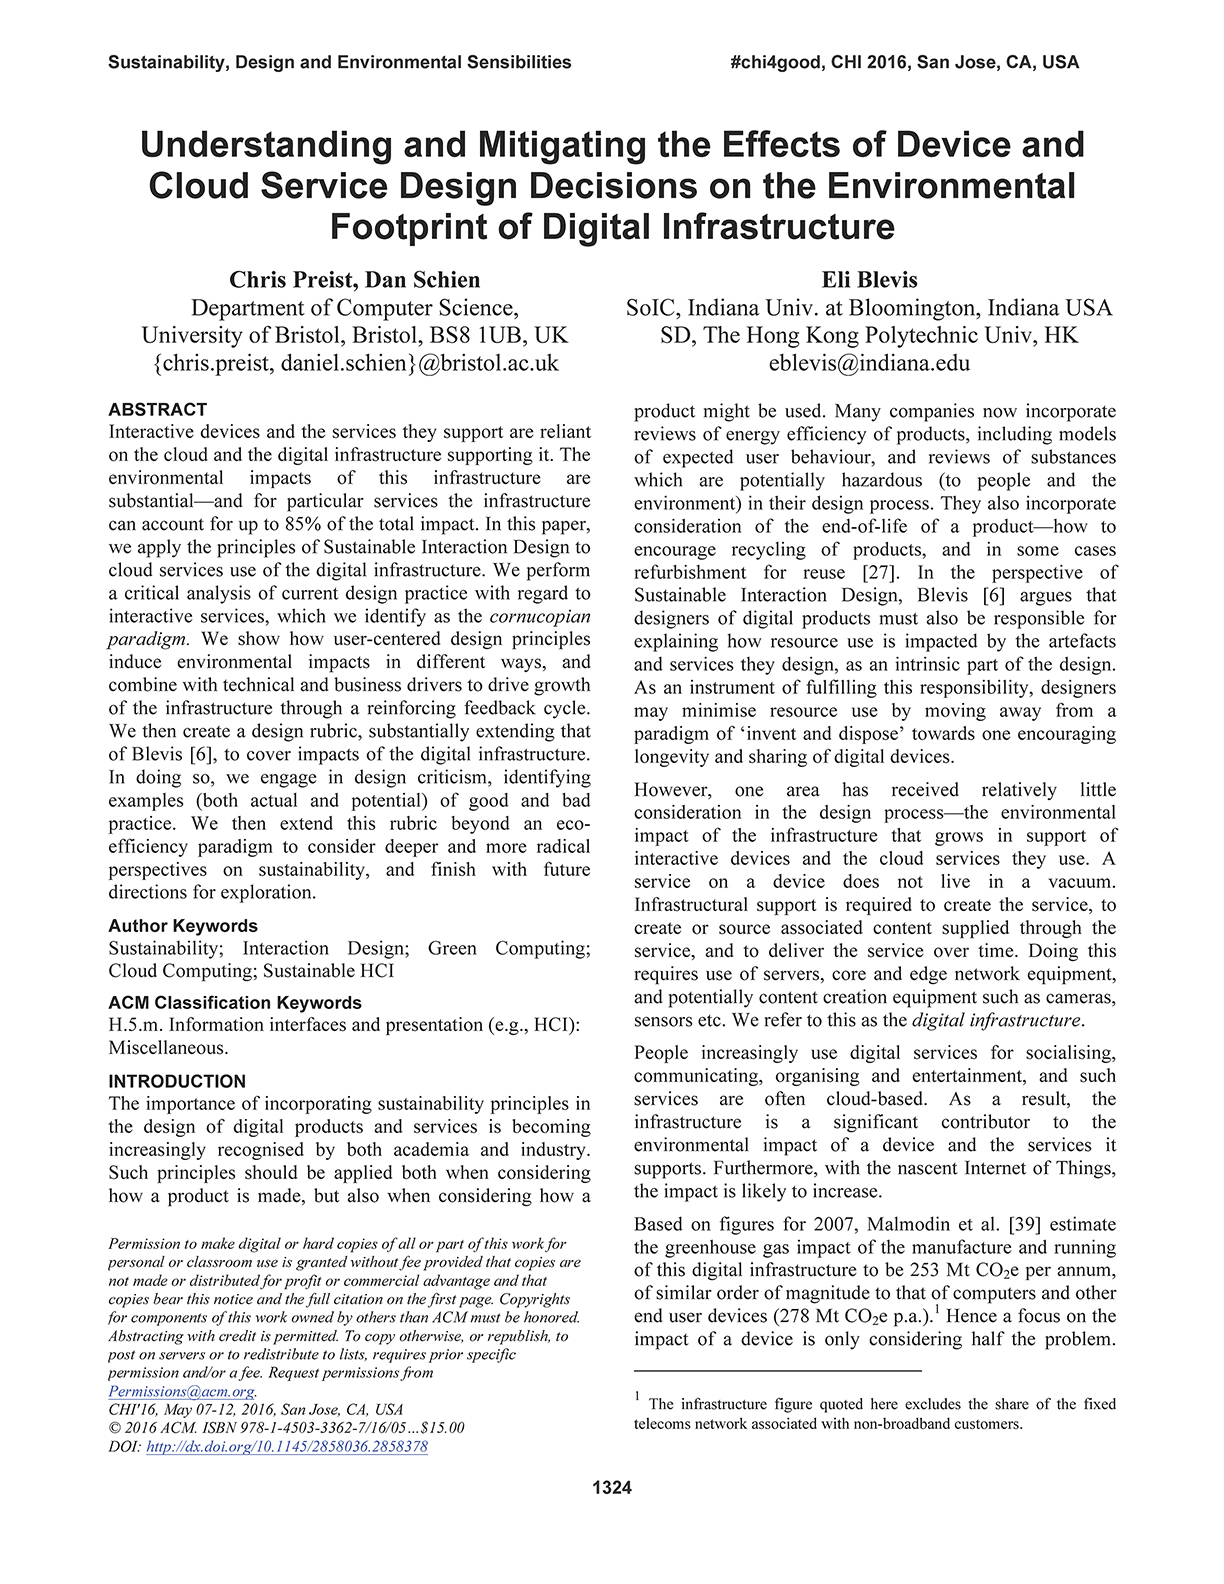 Understanding and Mitigating the Effects of Device and
Cloud Service Design Decisions on the Environmental
Footprint of Digital Infrastructure